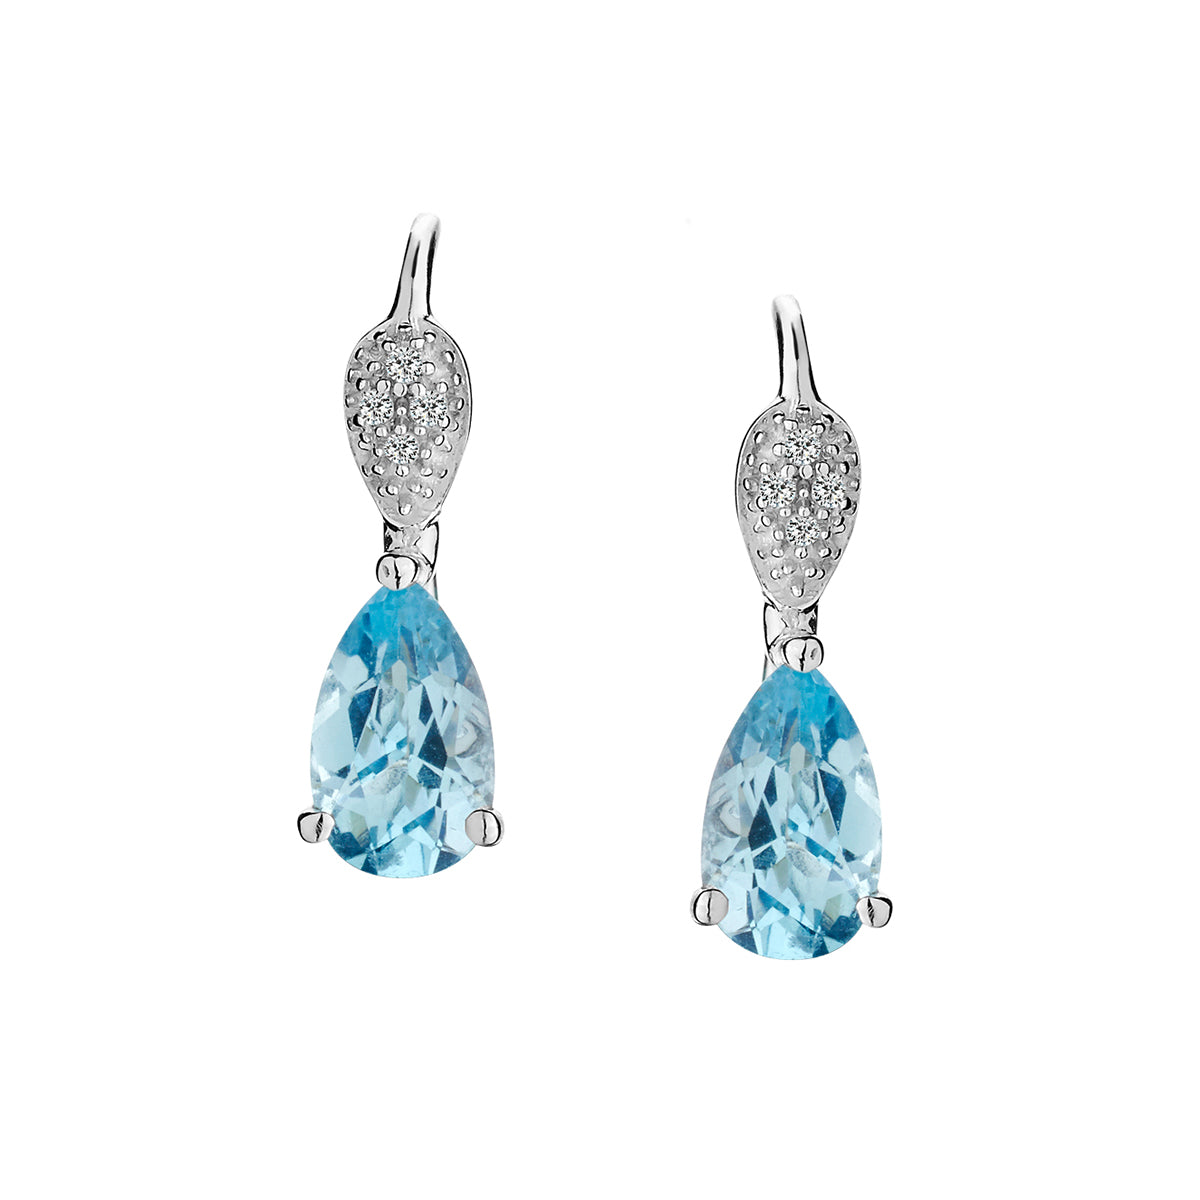 .50 Carat Diamond and Genuine Blue Topaz Leverback Earrings, 10kt White Gold.............NOW